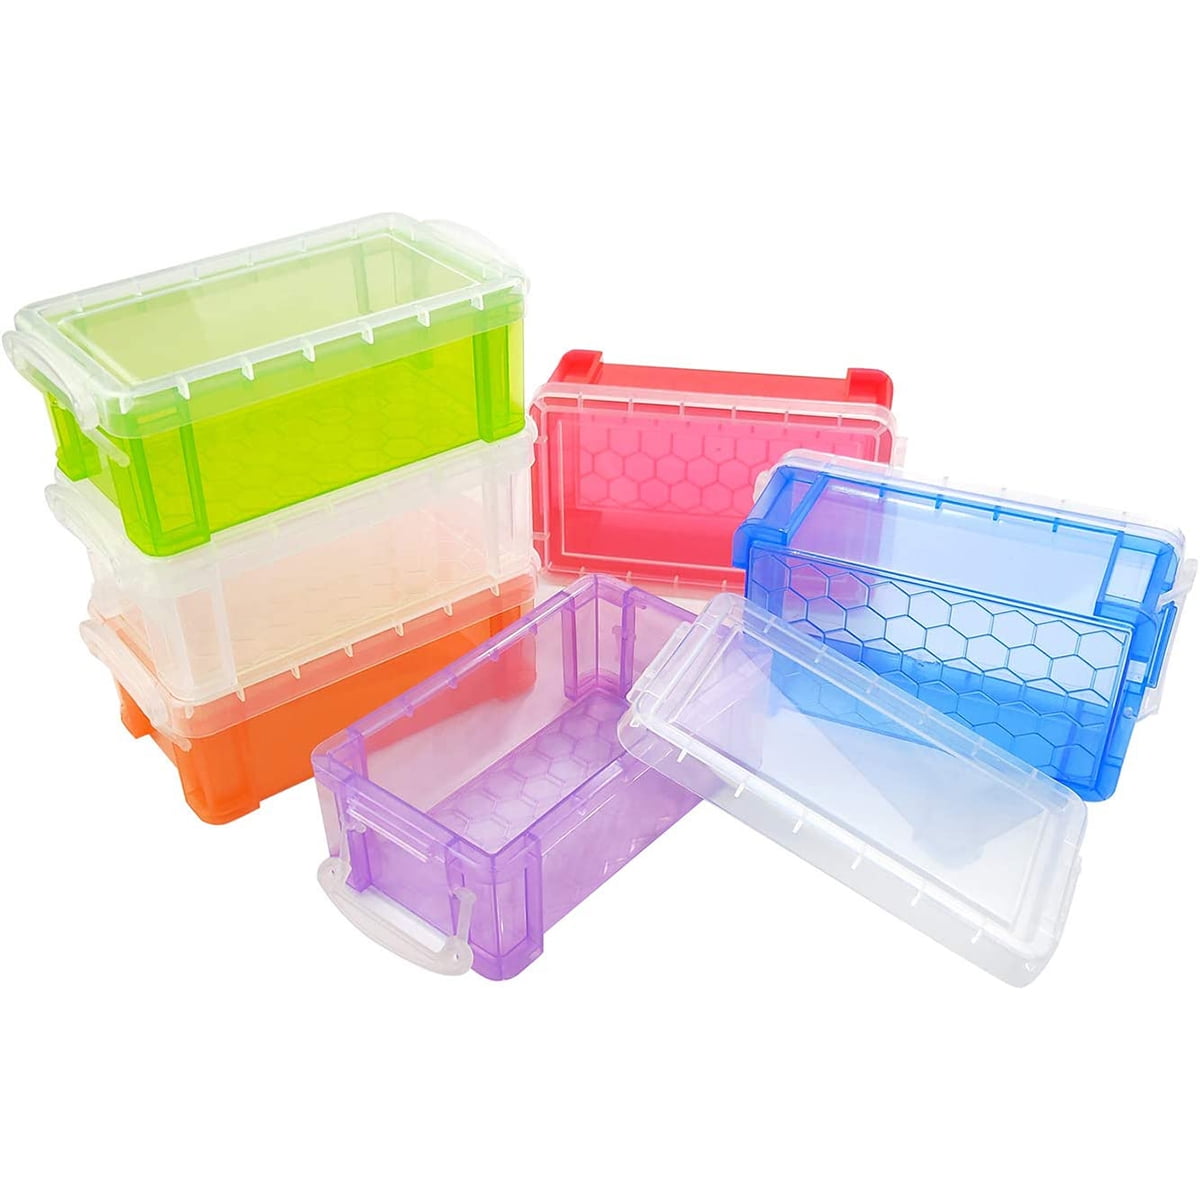 3.5x2.6x1.1 Inches Small Clear Plastic Box Storage Containers